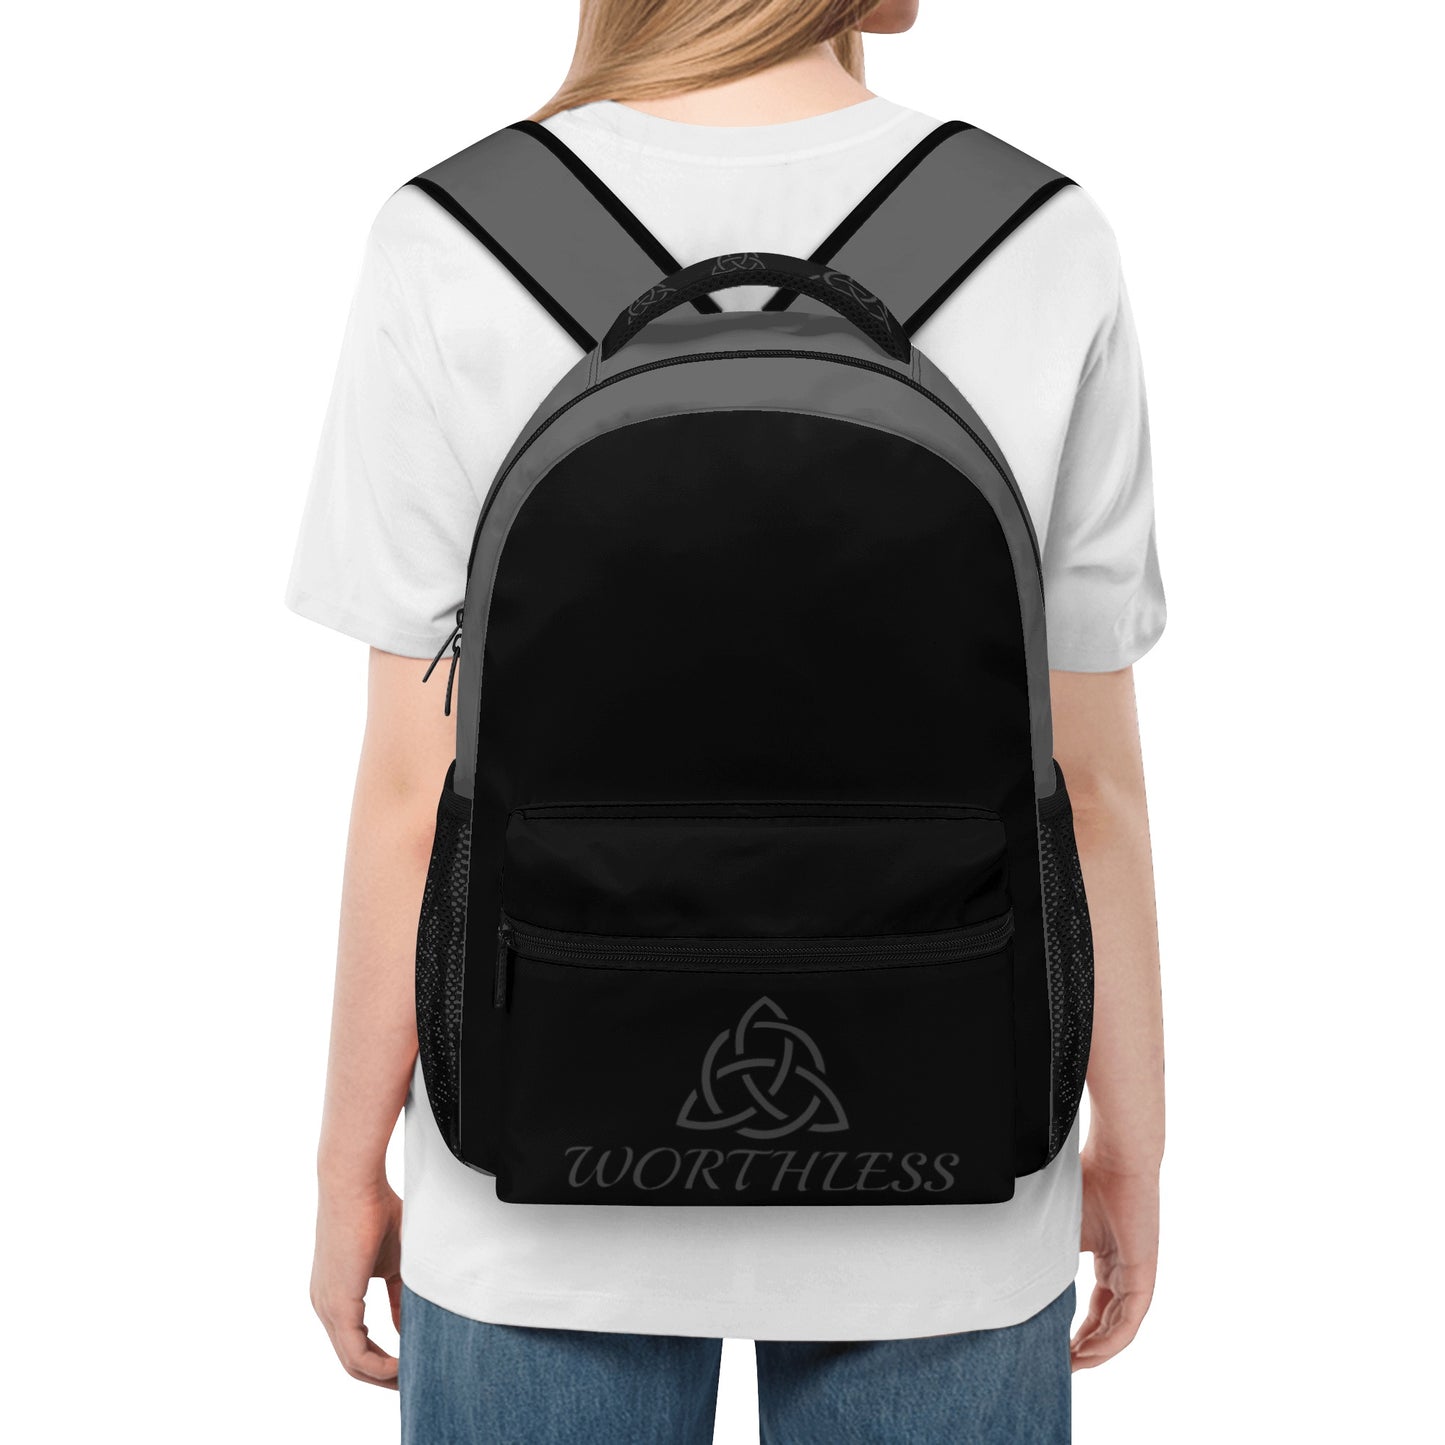 New Eco-Friendly Travel Backpack